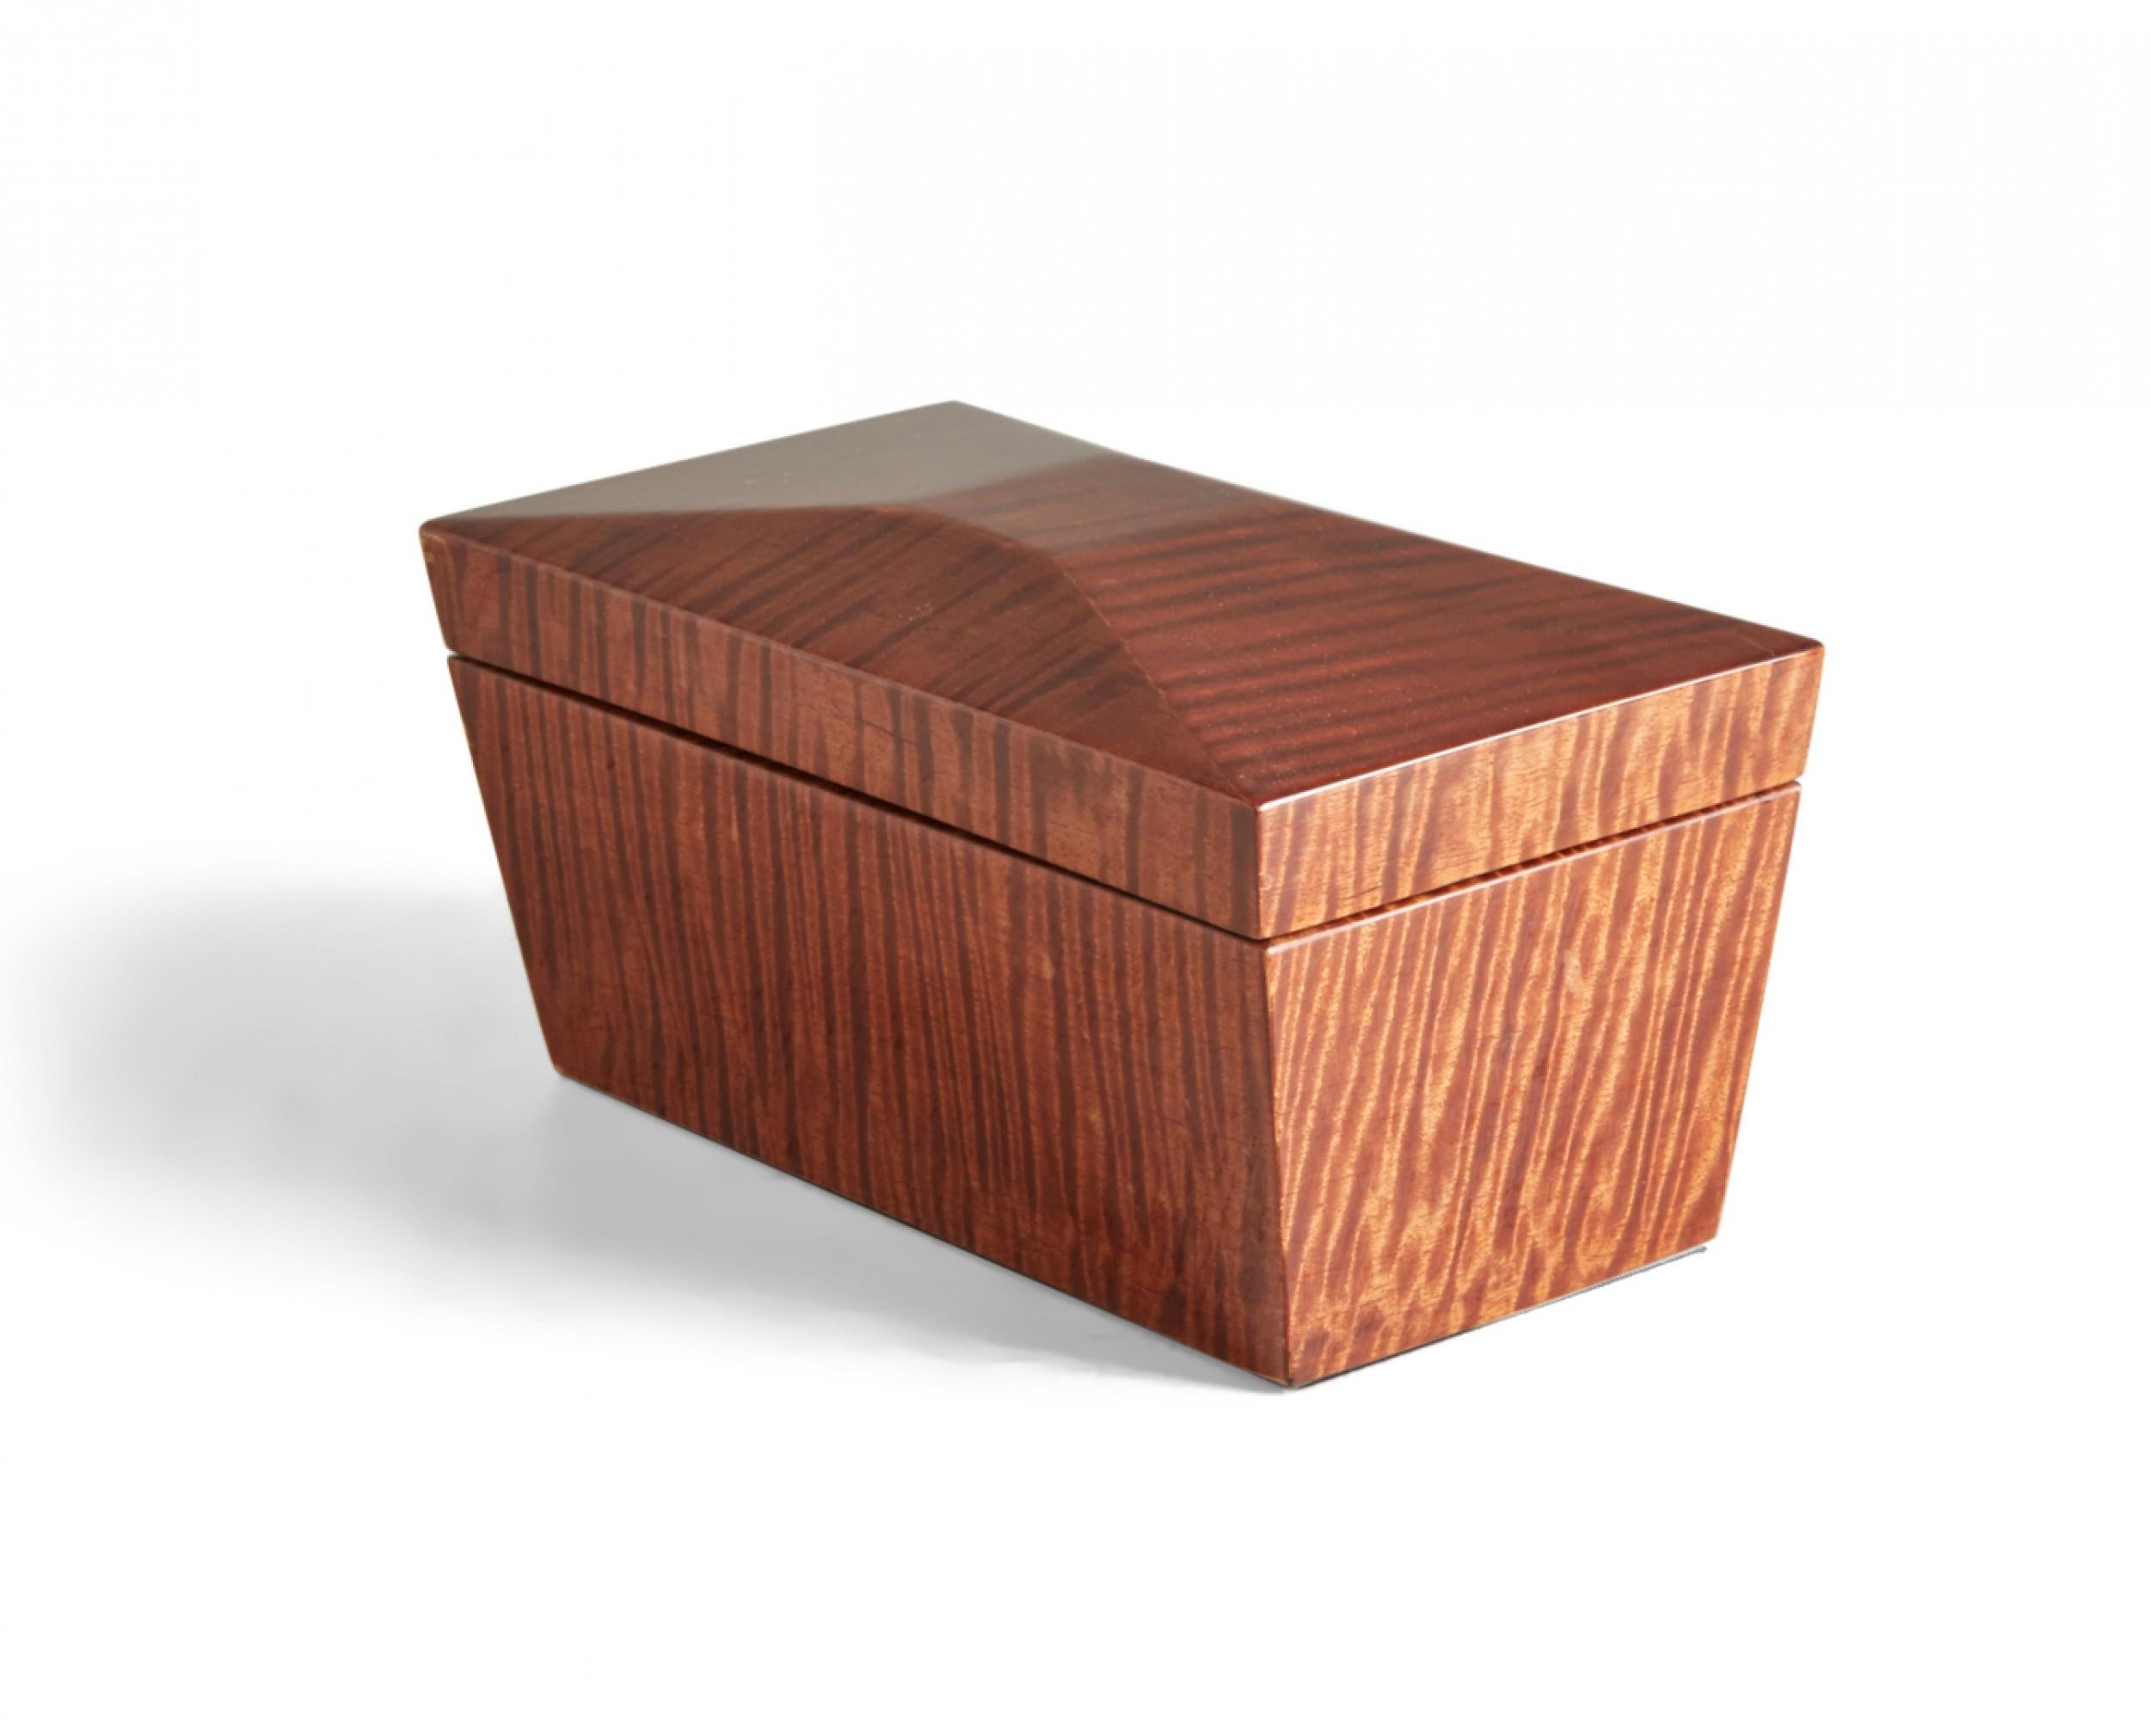 Contemporary decorative lacquered tiger maple box with a rectangular profile with faceted lid and tapered sides, and a brass-hinged lid that opens to reveal two interior compartments covered with black painted wooden square lids with turned knobs.